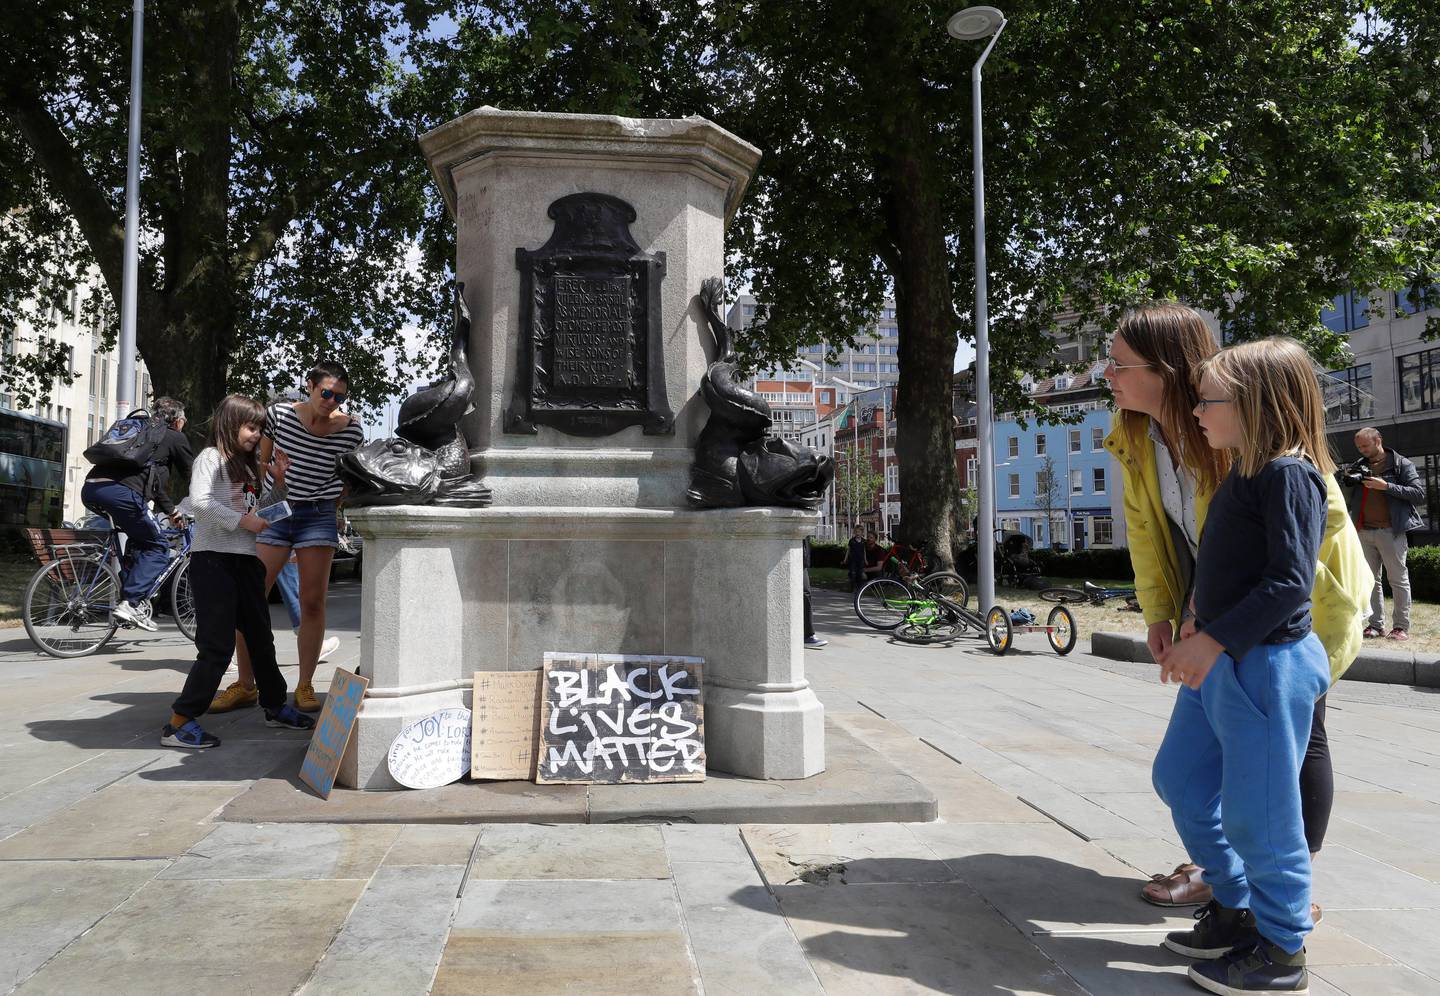 People look at the pedestal of the toppled statue of Edward Colston in Bristol, England, Monday, June 8, 2020, following the downing of the statue on Sunday at a Black Lives Matter demo. The toppling of the statue was greeted with joyous scenes, recognition of the fact that he was a notorious slave trader  a badge of shame in what is one of Britains most liberal cities. (AP Photo/Kirsty Wigglesworth)